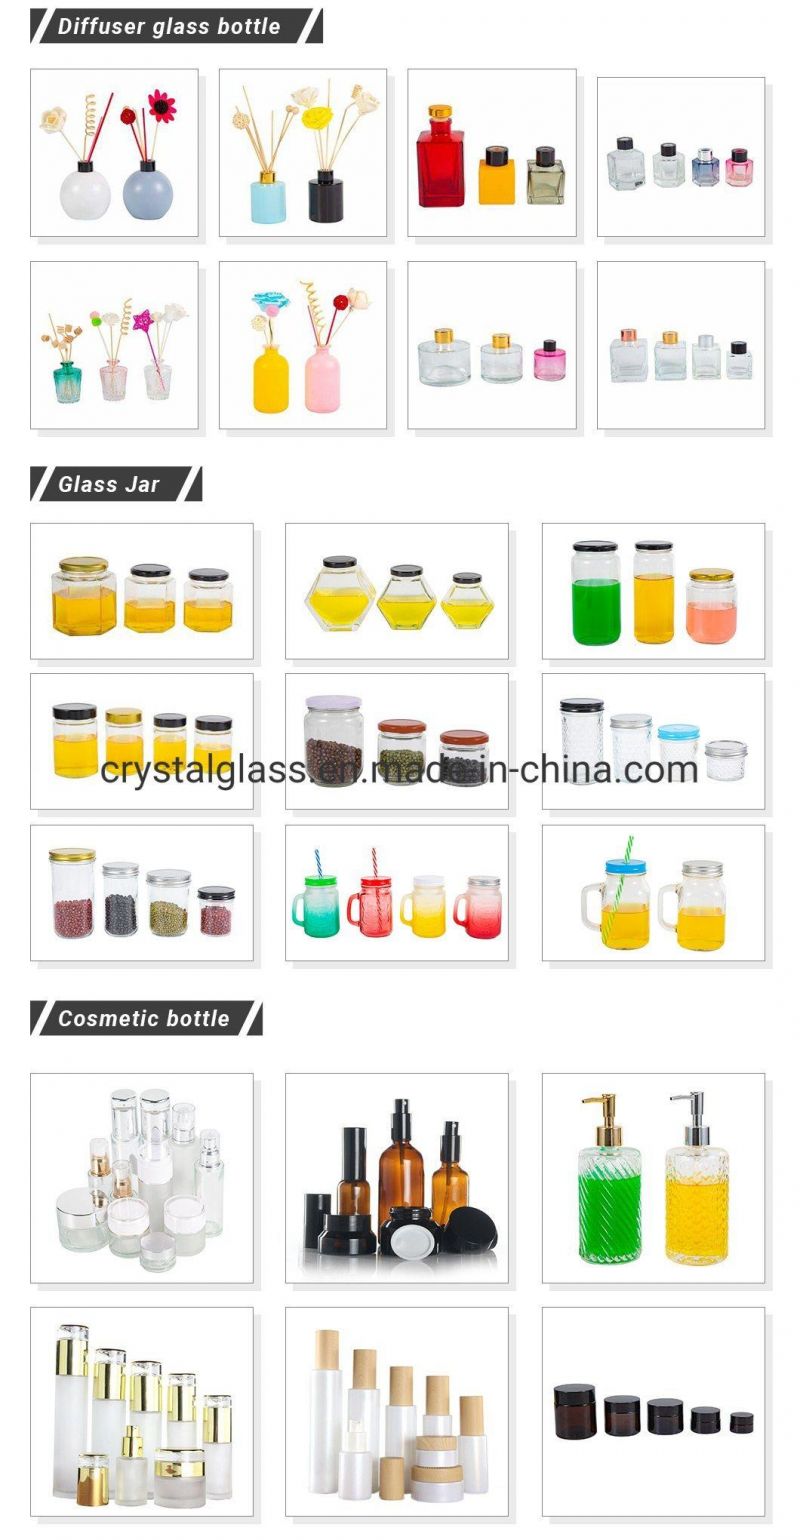 Customized Printing Glass Bottle for Mineral Water Drinks with Airtight Cap 1000ml